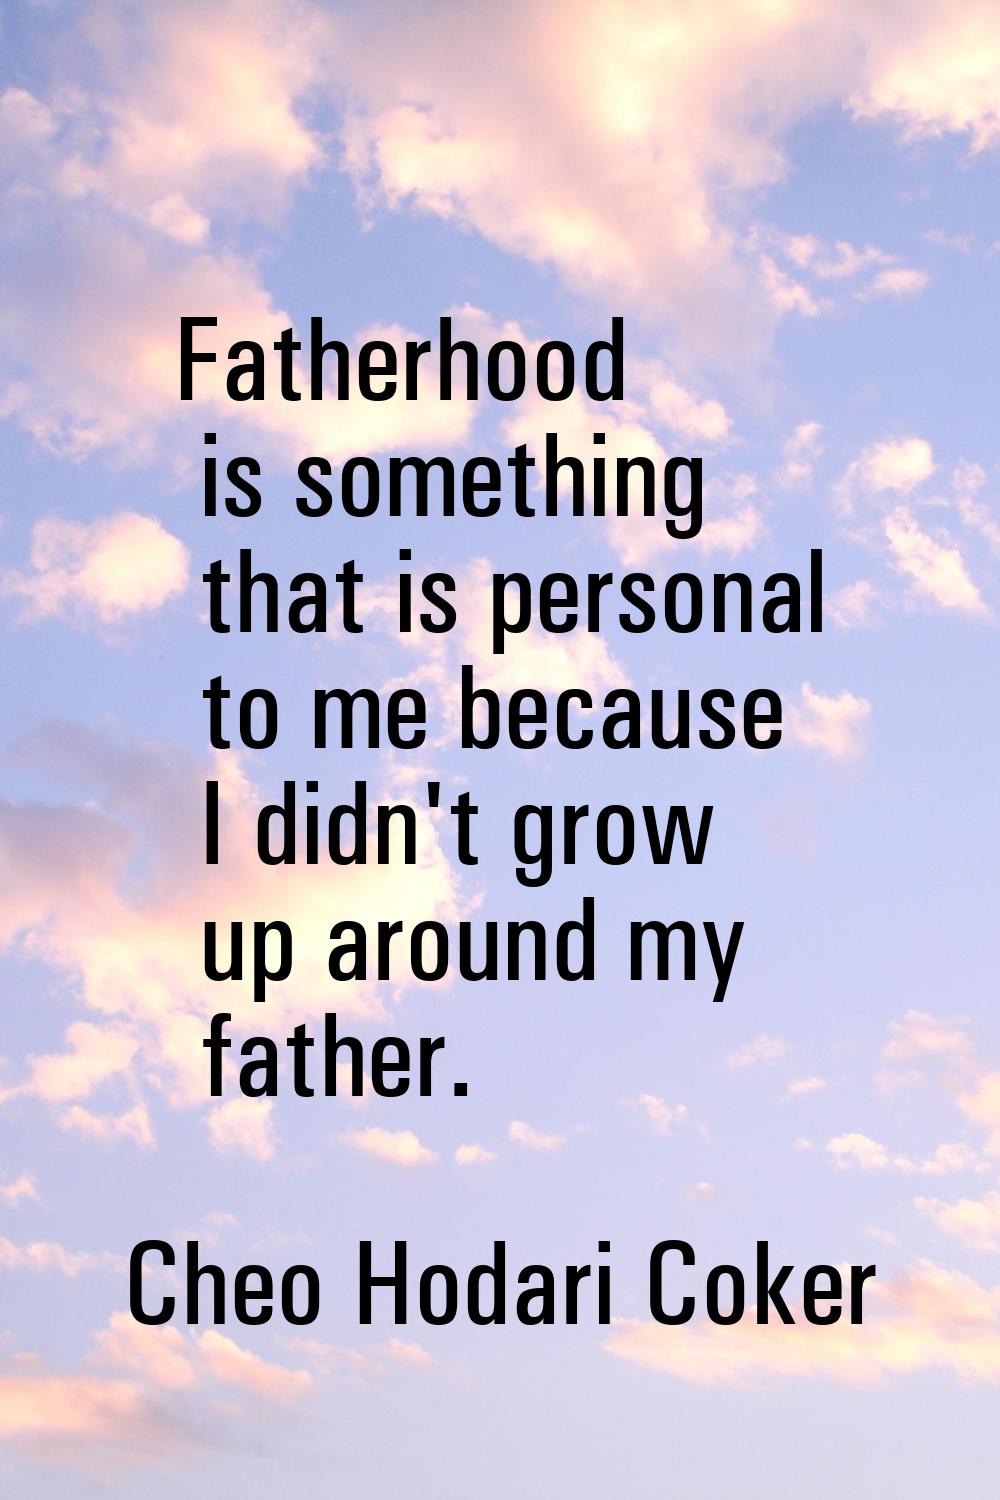 Fatherhood is something that is personal to me because I didn't grow up around my father.